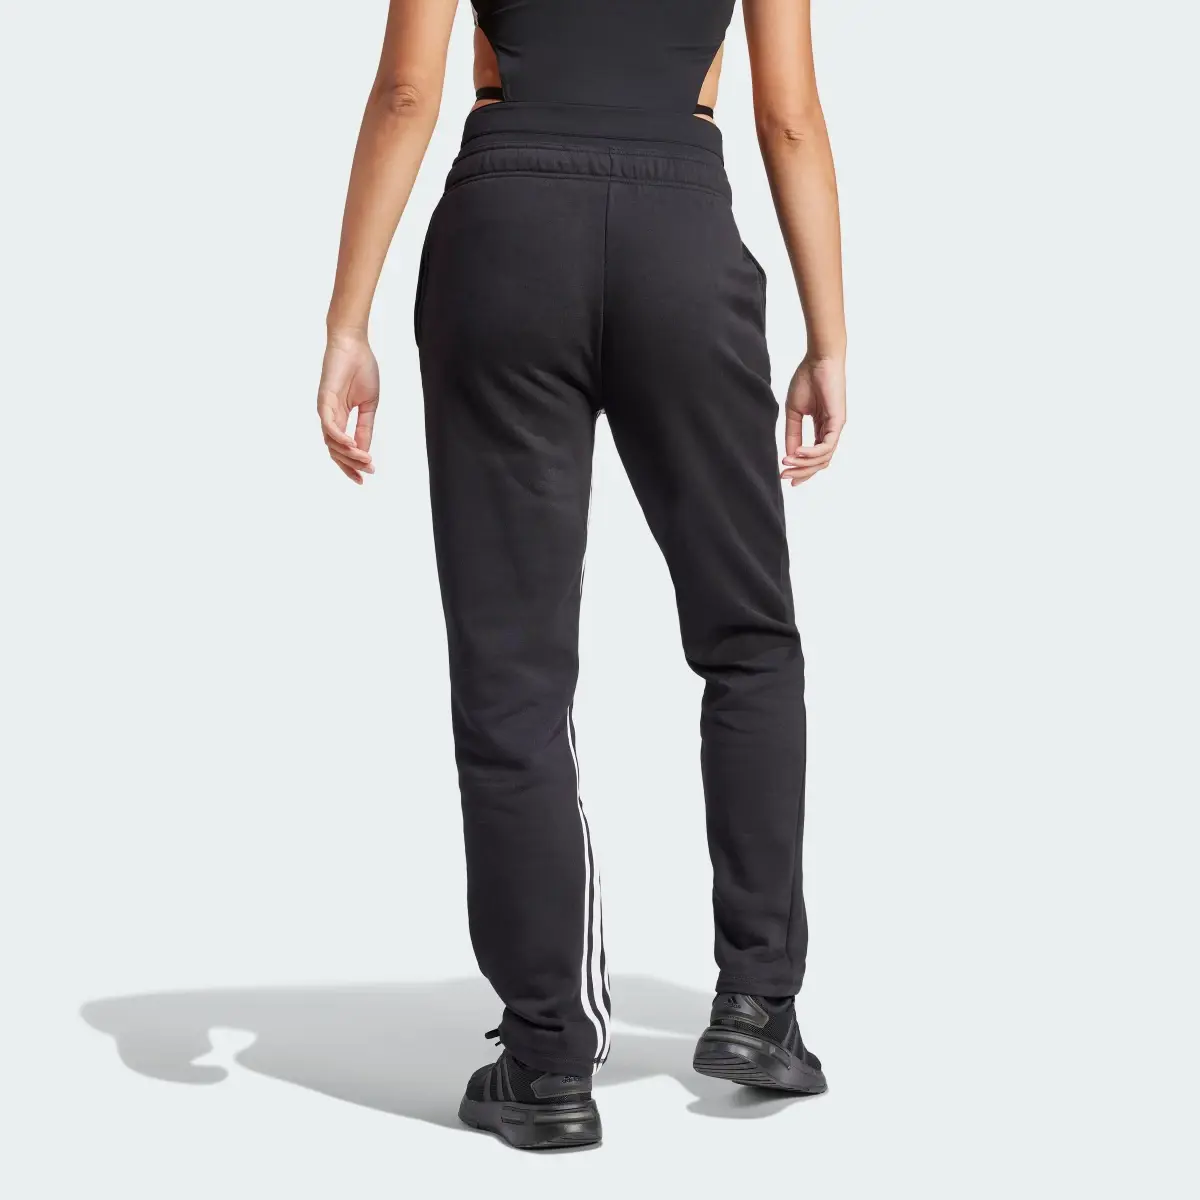 Adidas Express All-Gender Anti-Microbial Joggers. 2